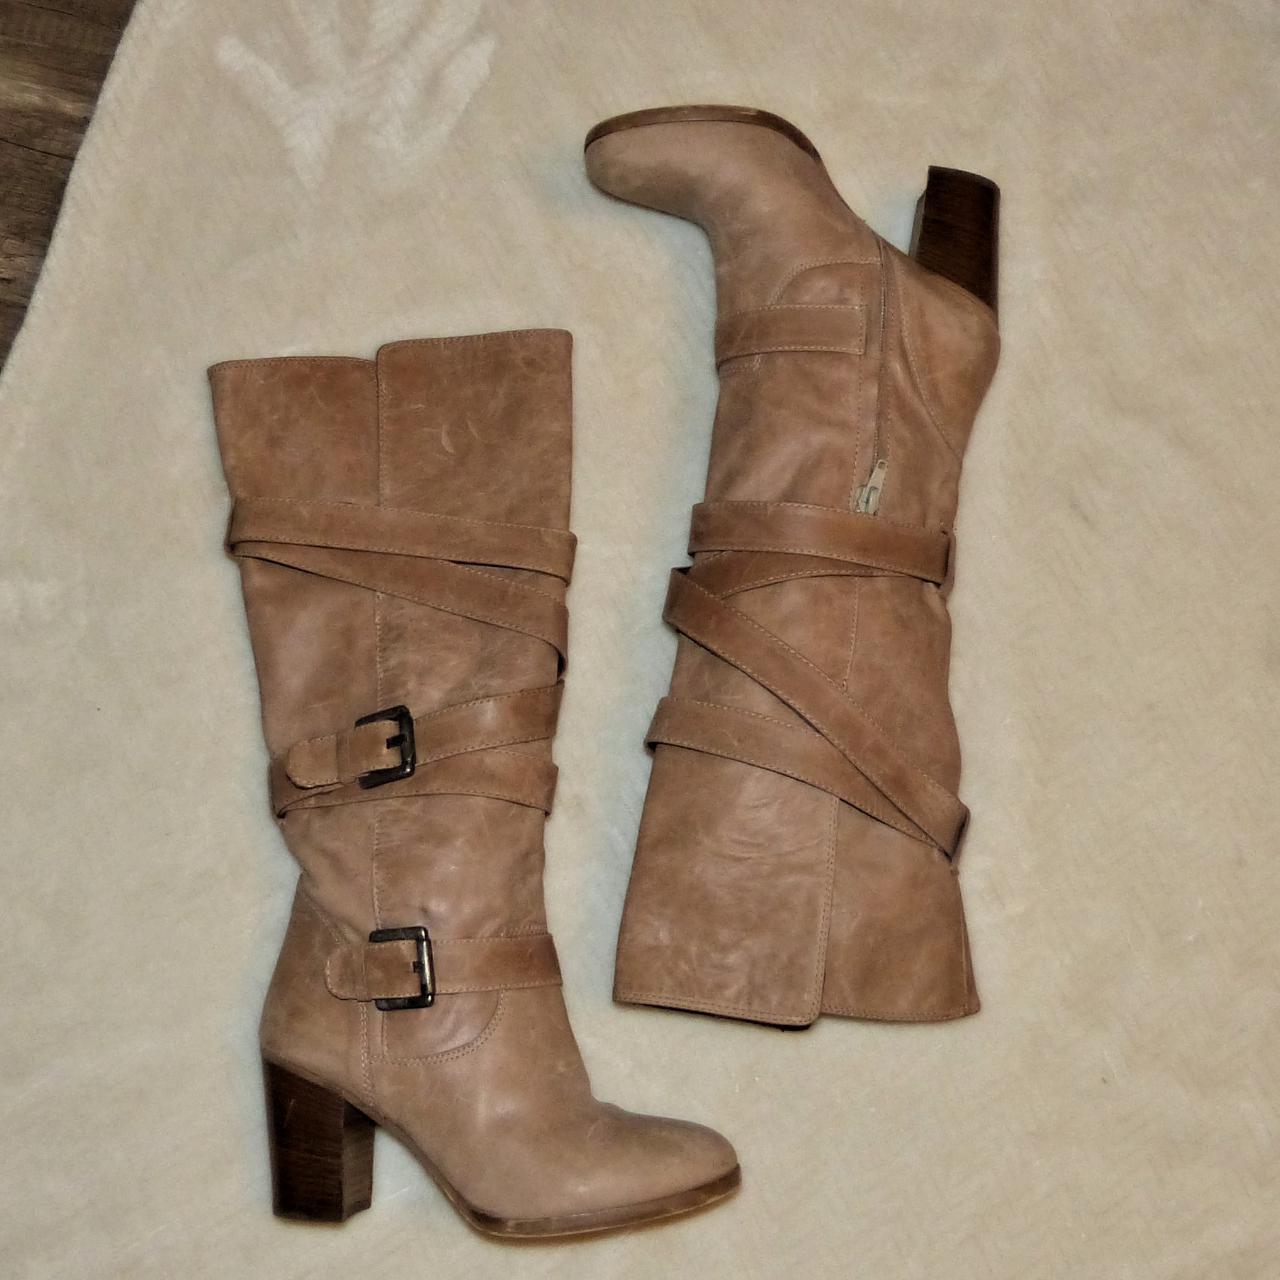 Women's Tan and Brown Boots (4)